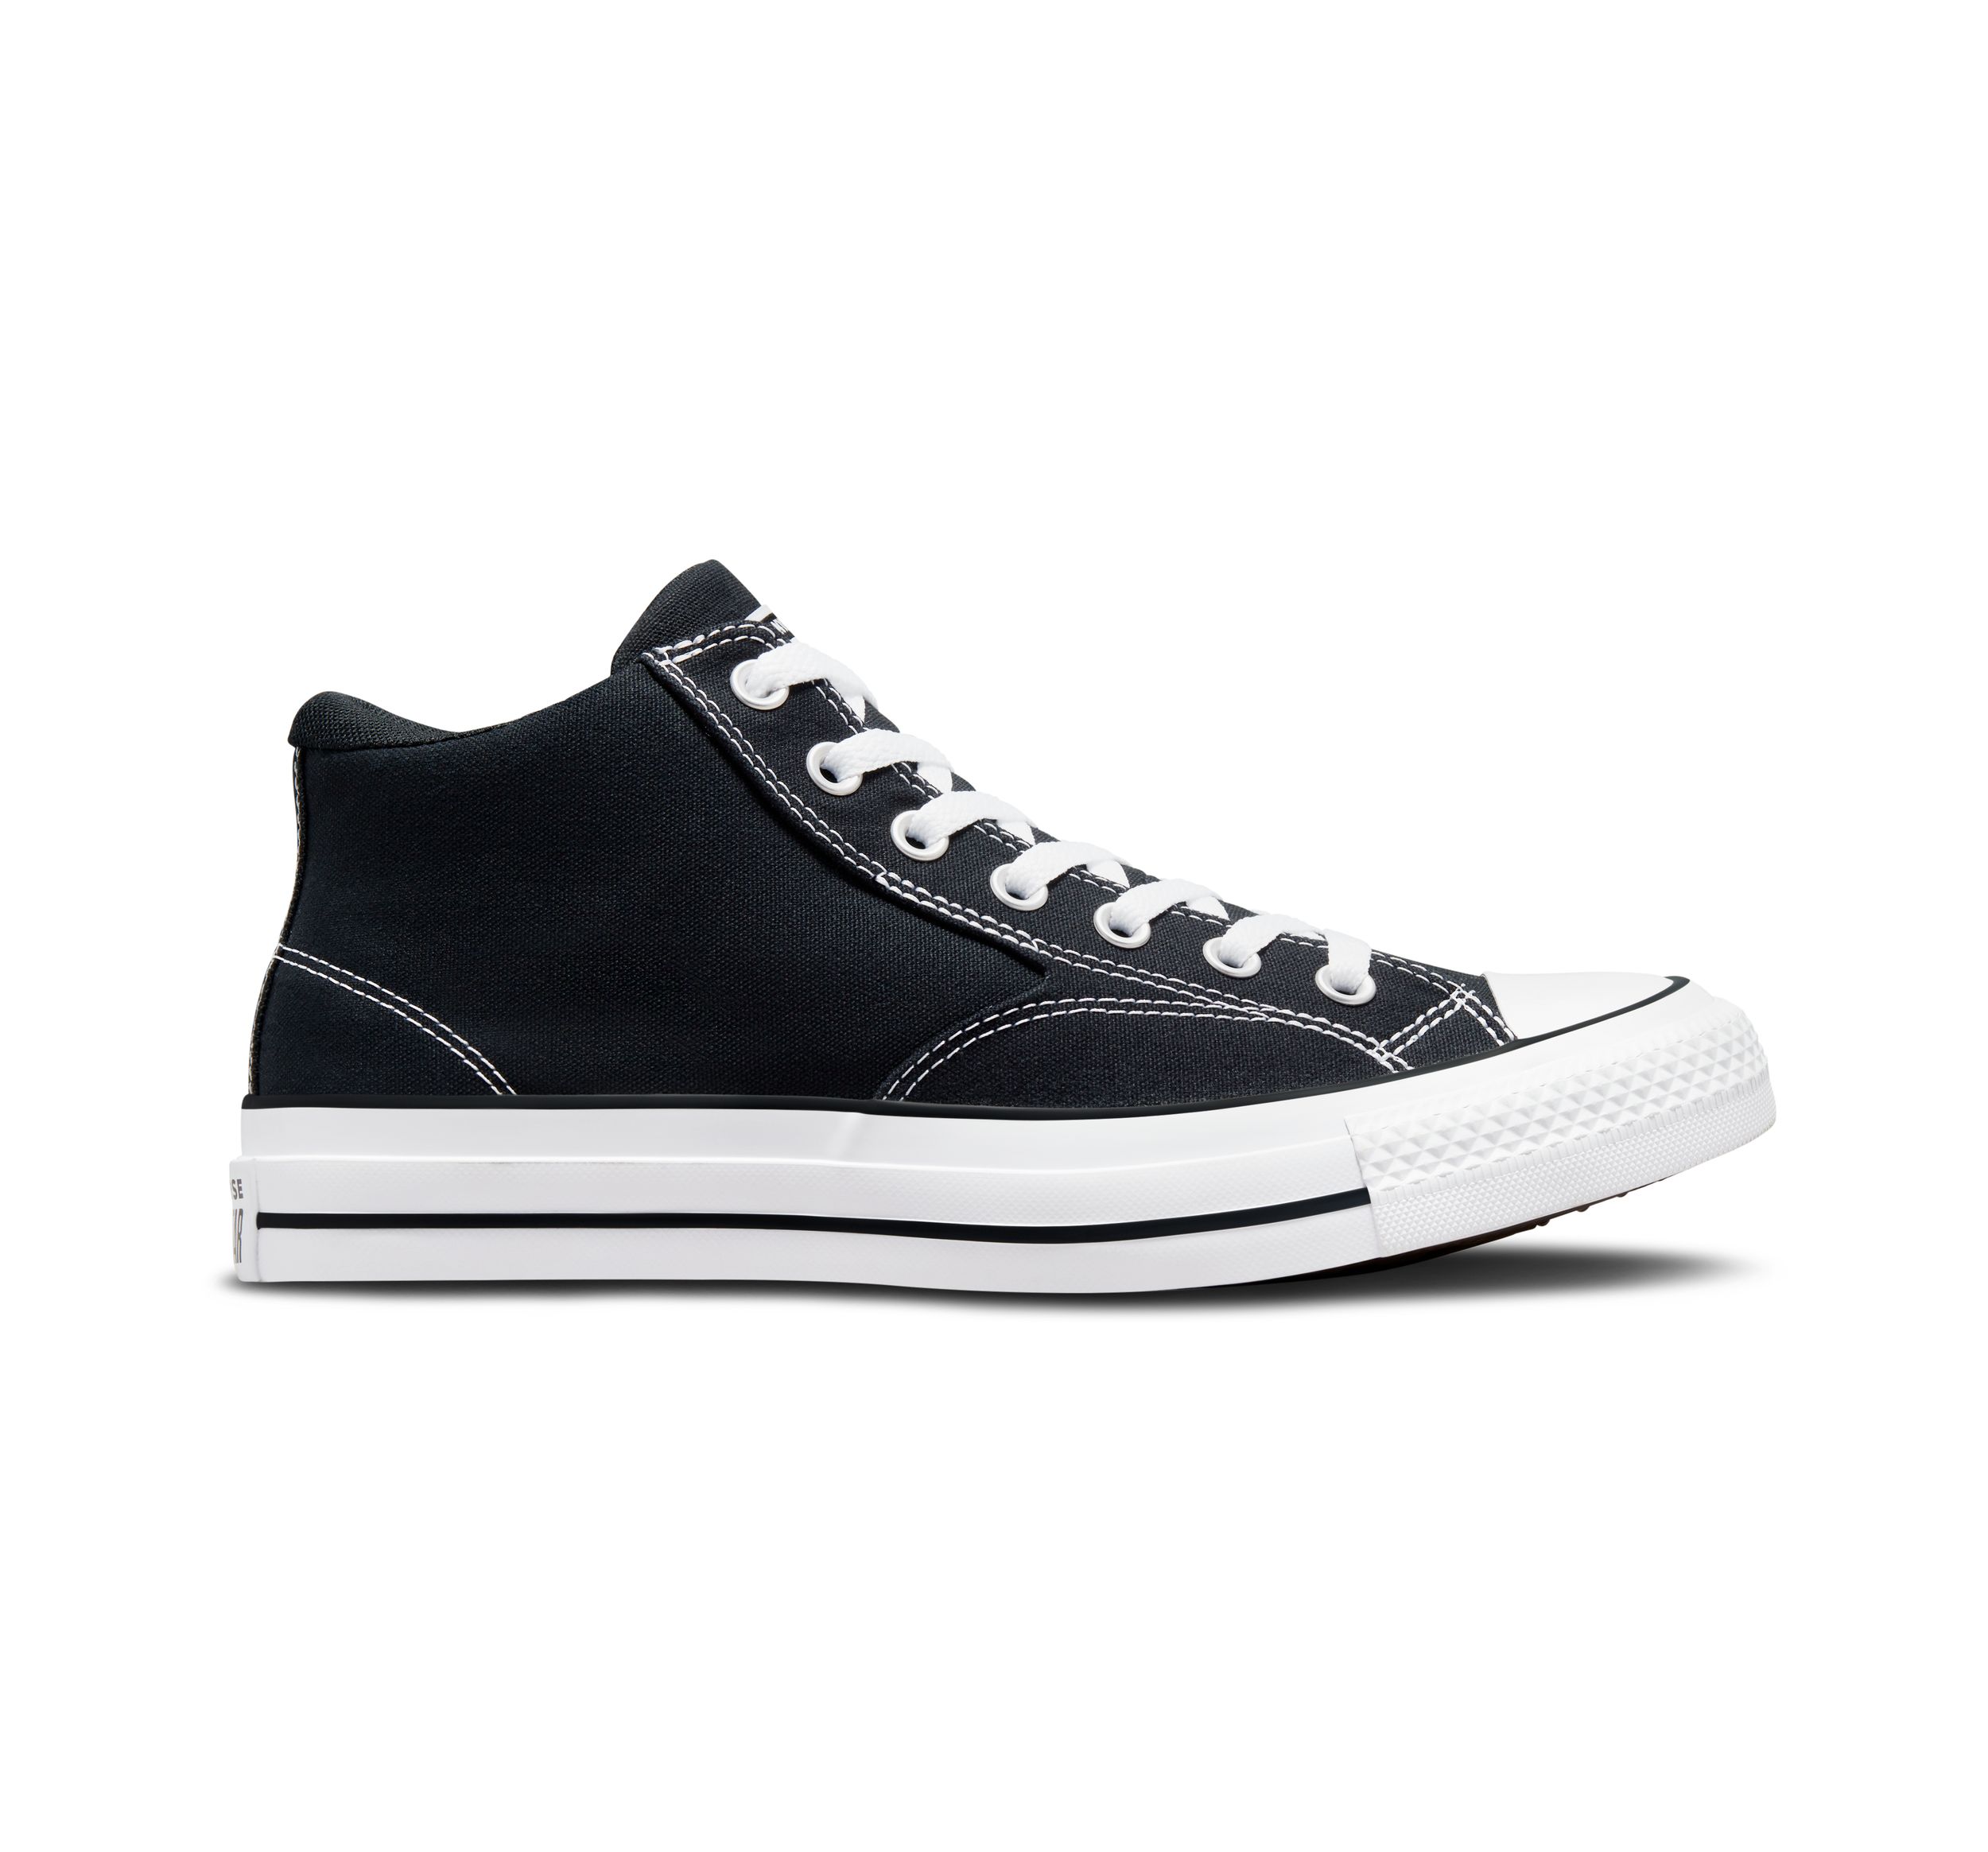 Image of Converse Men's Chuck Taylor All Star Malden Street Shoes